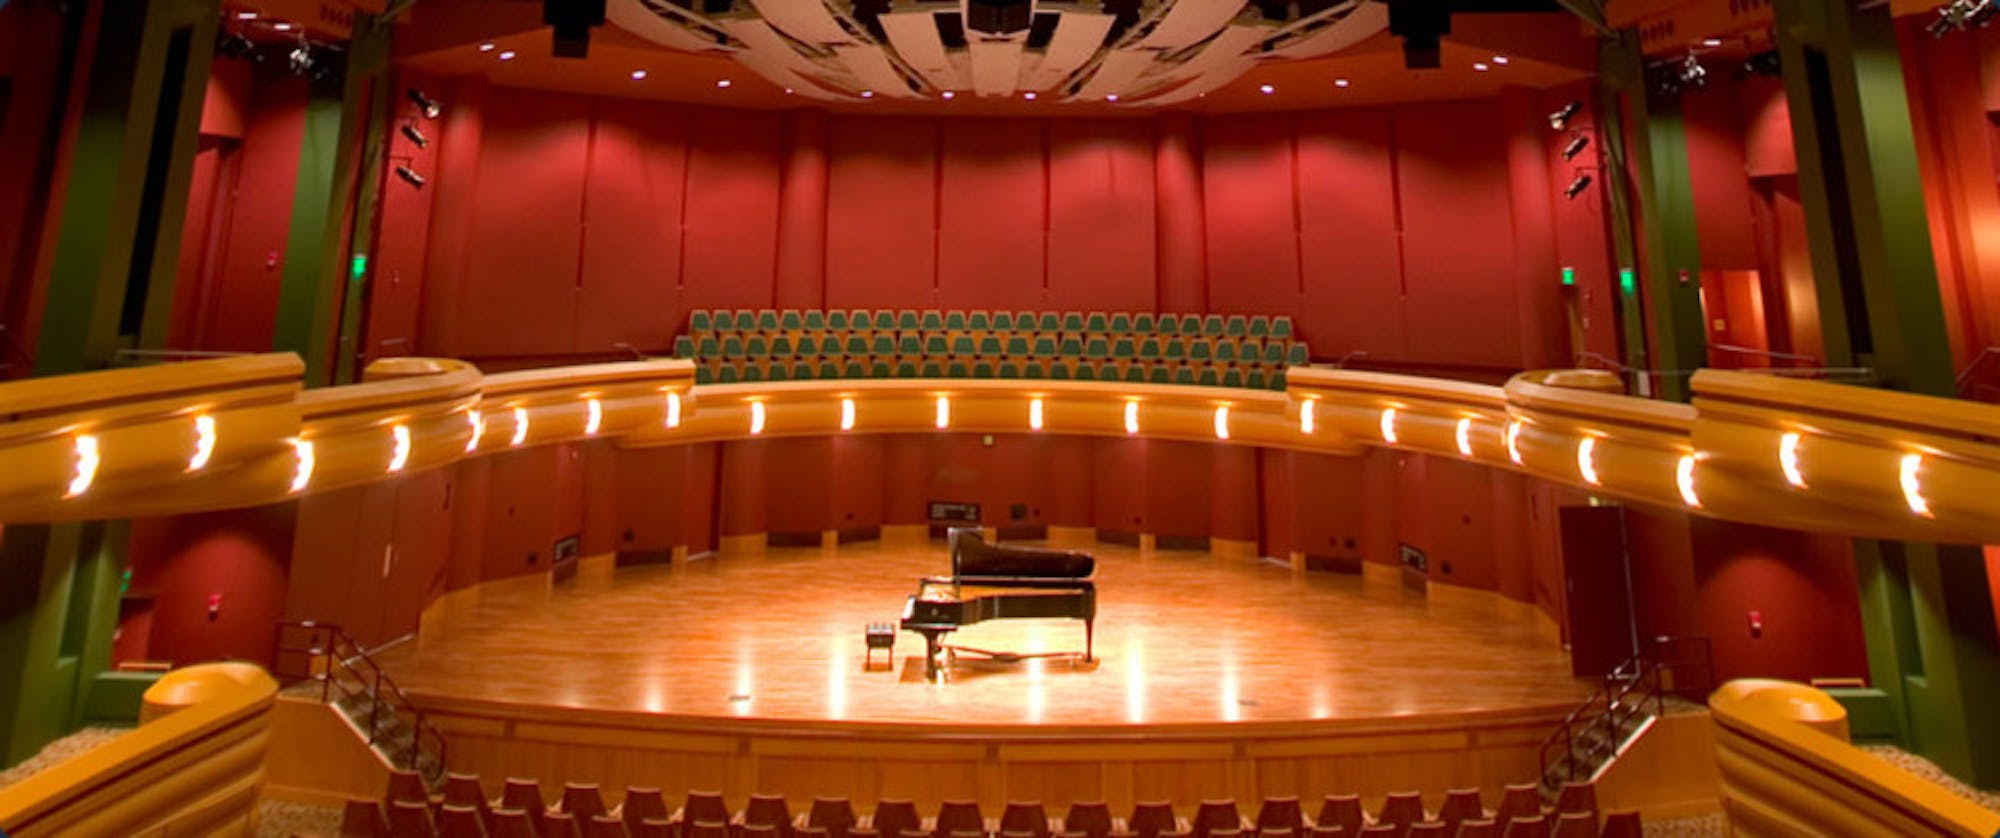 The Debartolo Performing Arts Center (DPAC) was named one of the